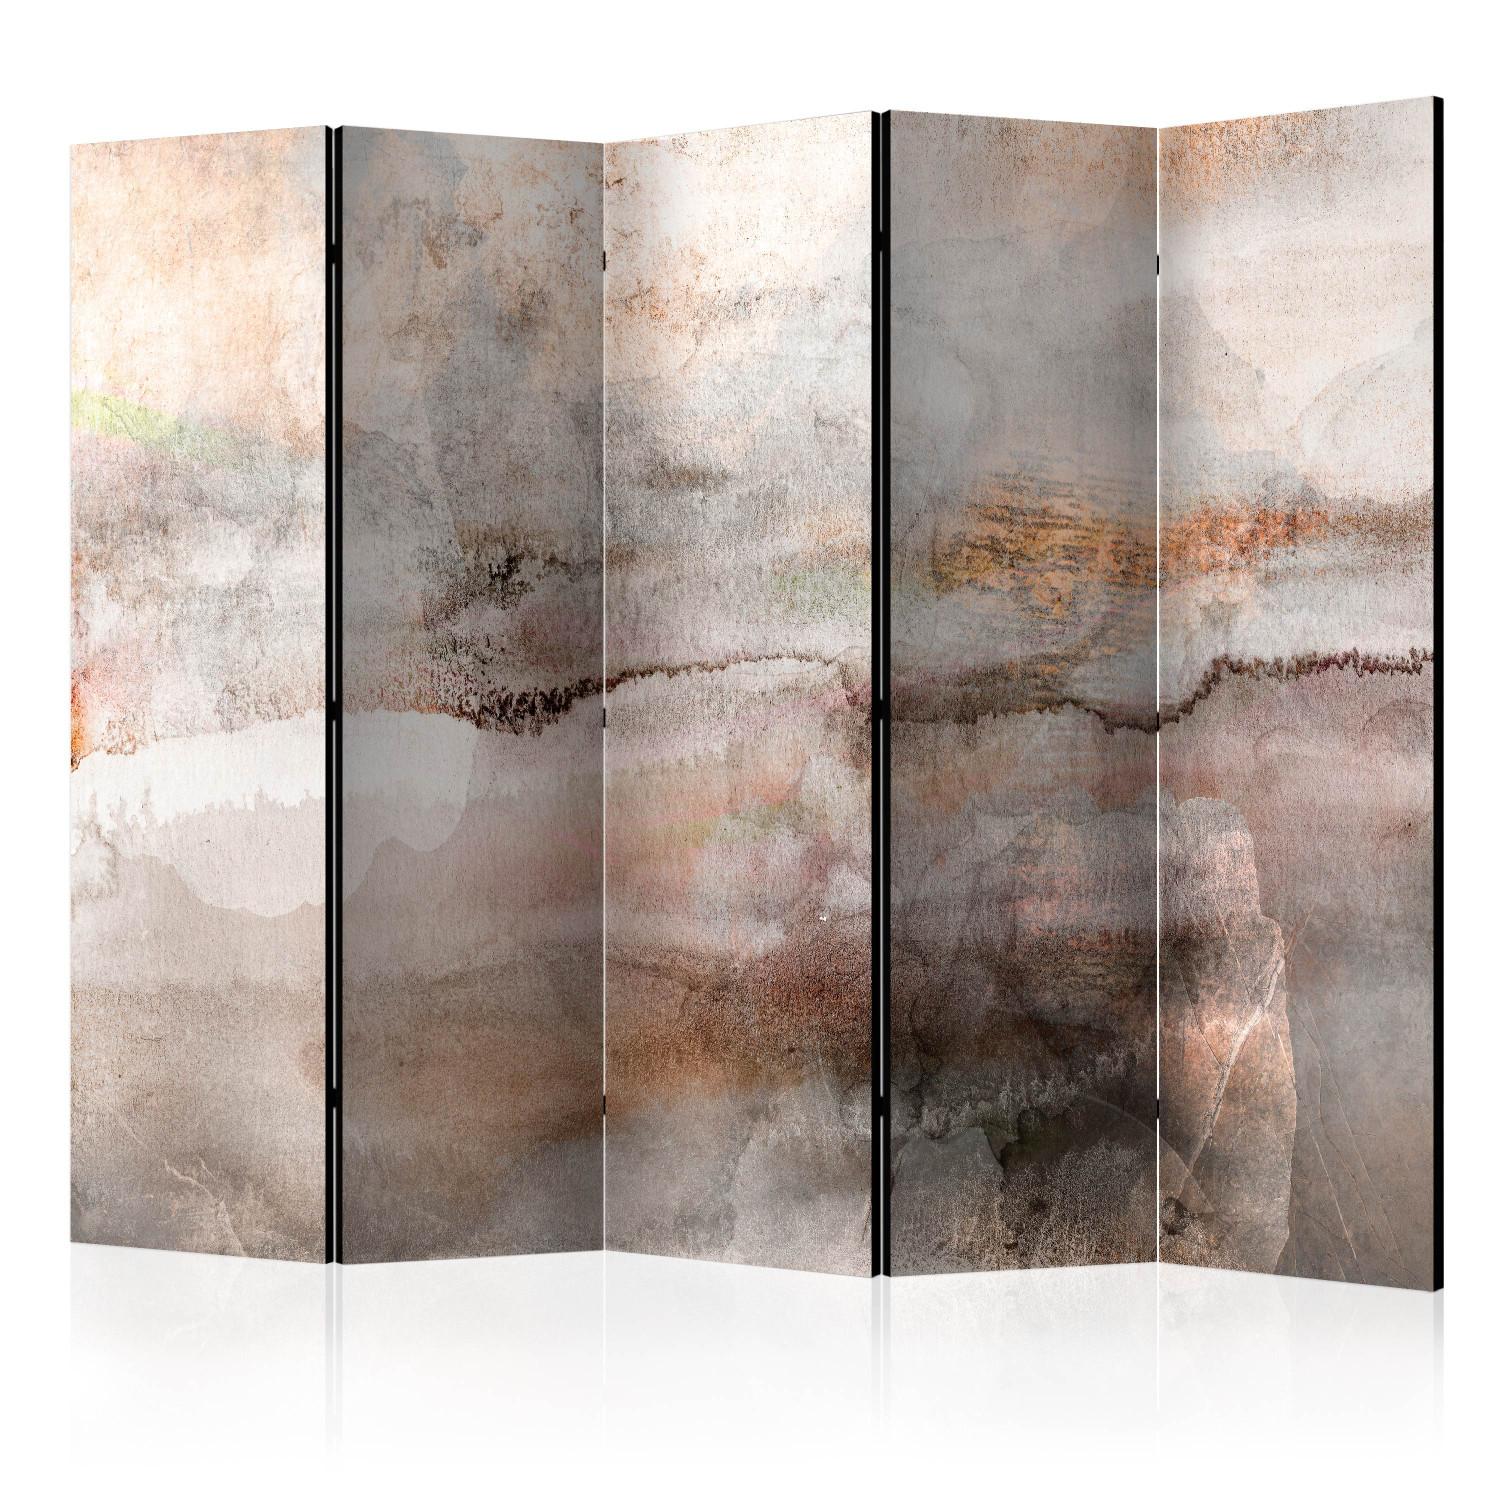 Room Divider Entanglement II (5-piece) - Abstraction with uneven texture